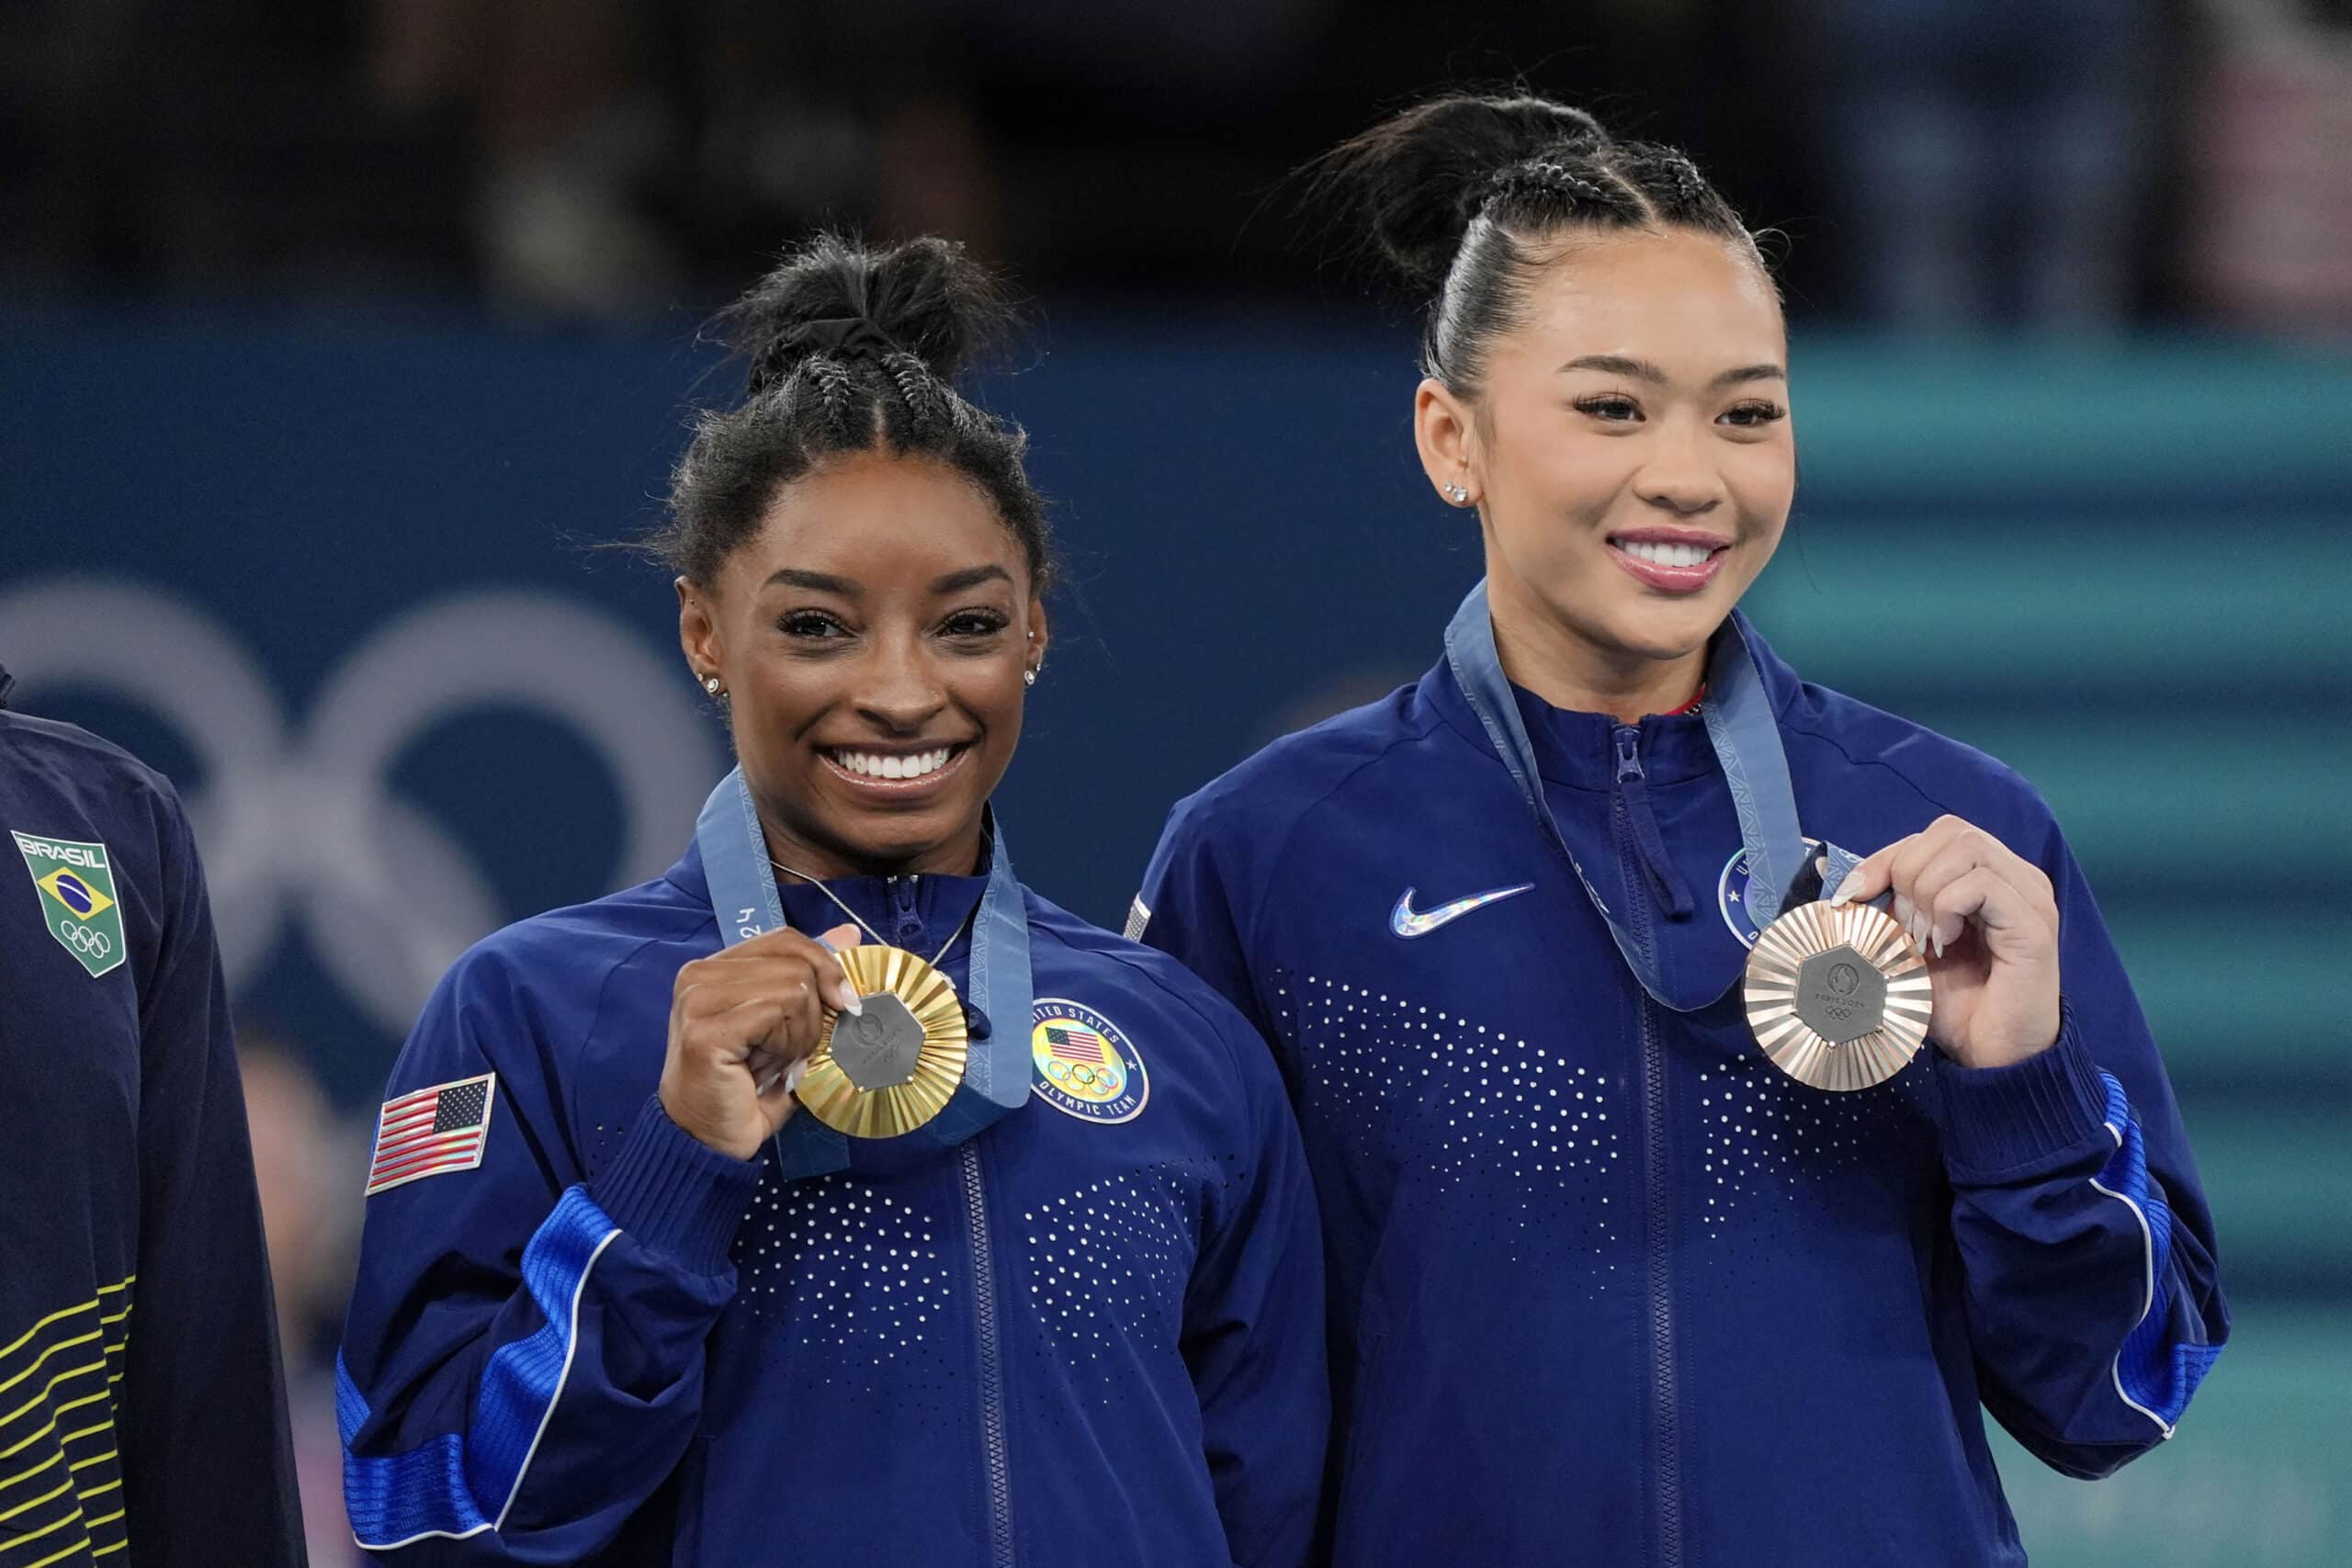 Simone Biles and Sunisa Lee of the United States pose for a photo with their medals in the womenís gymnastics all-around during the Paris 2024 Olympic Summer Games at Bercy Arena.